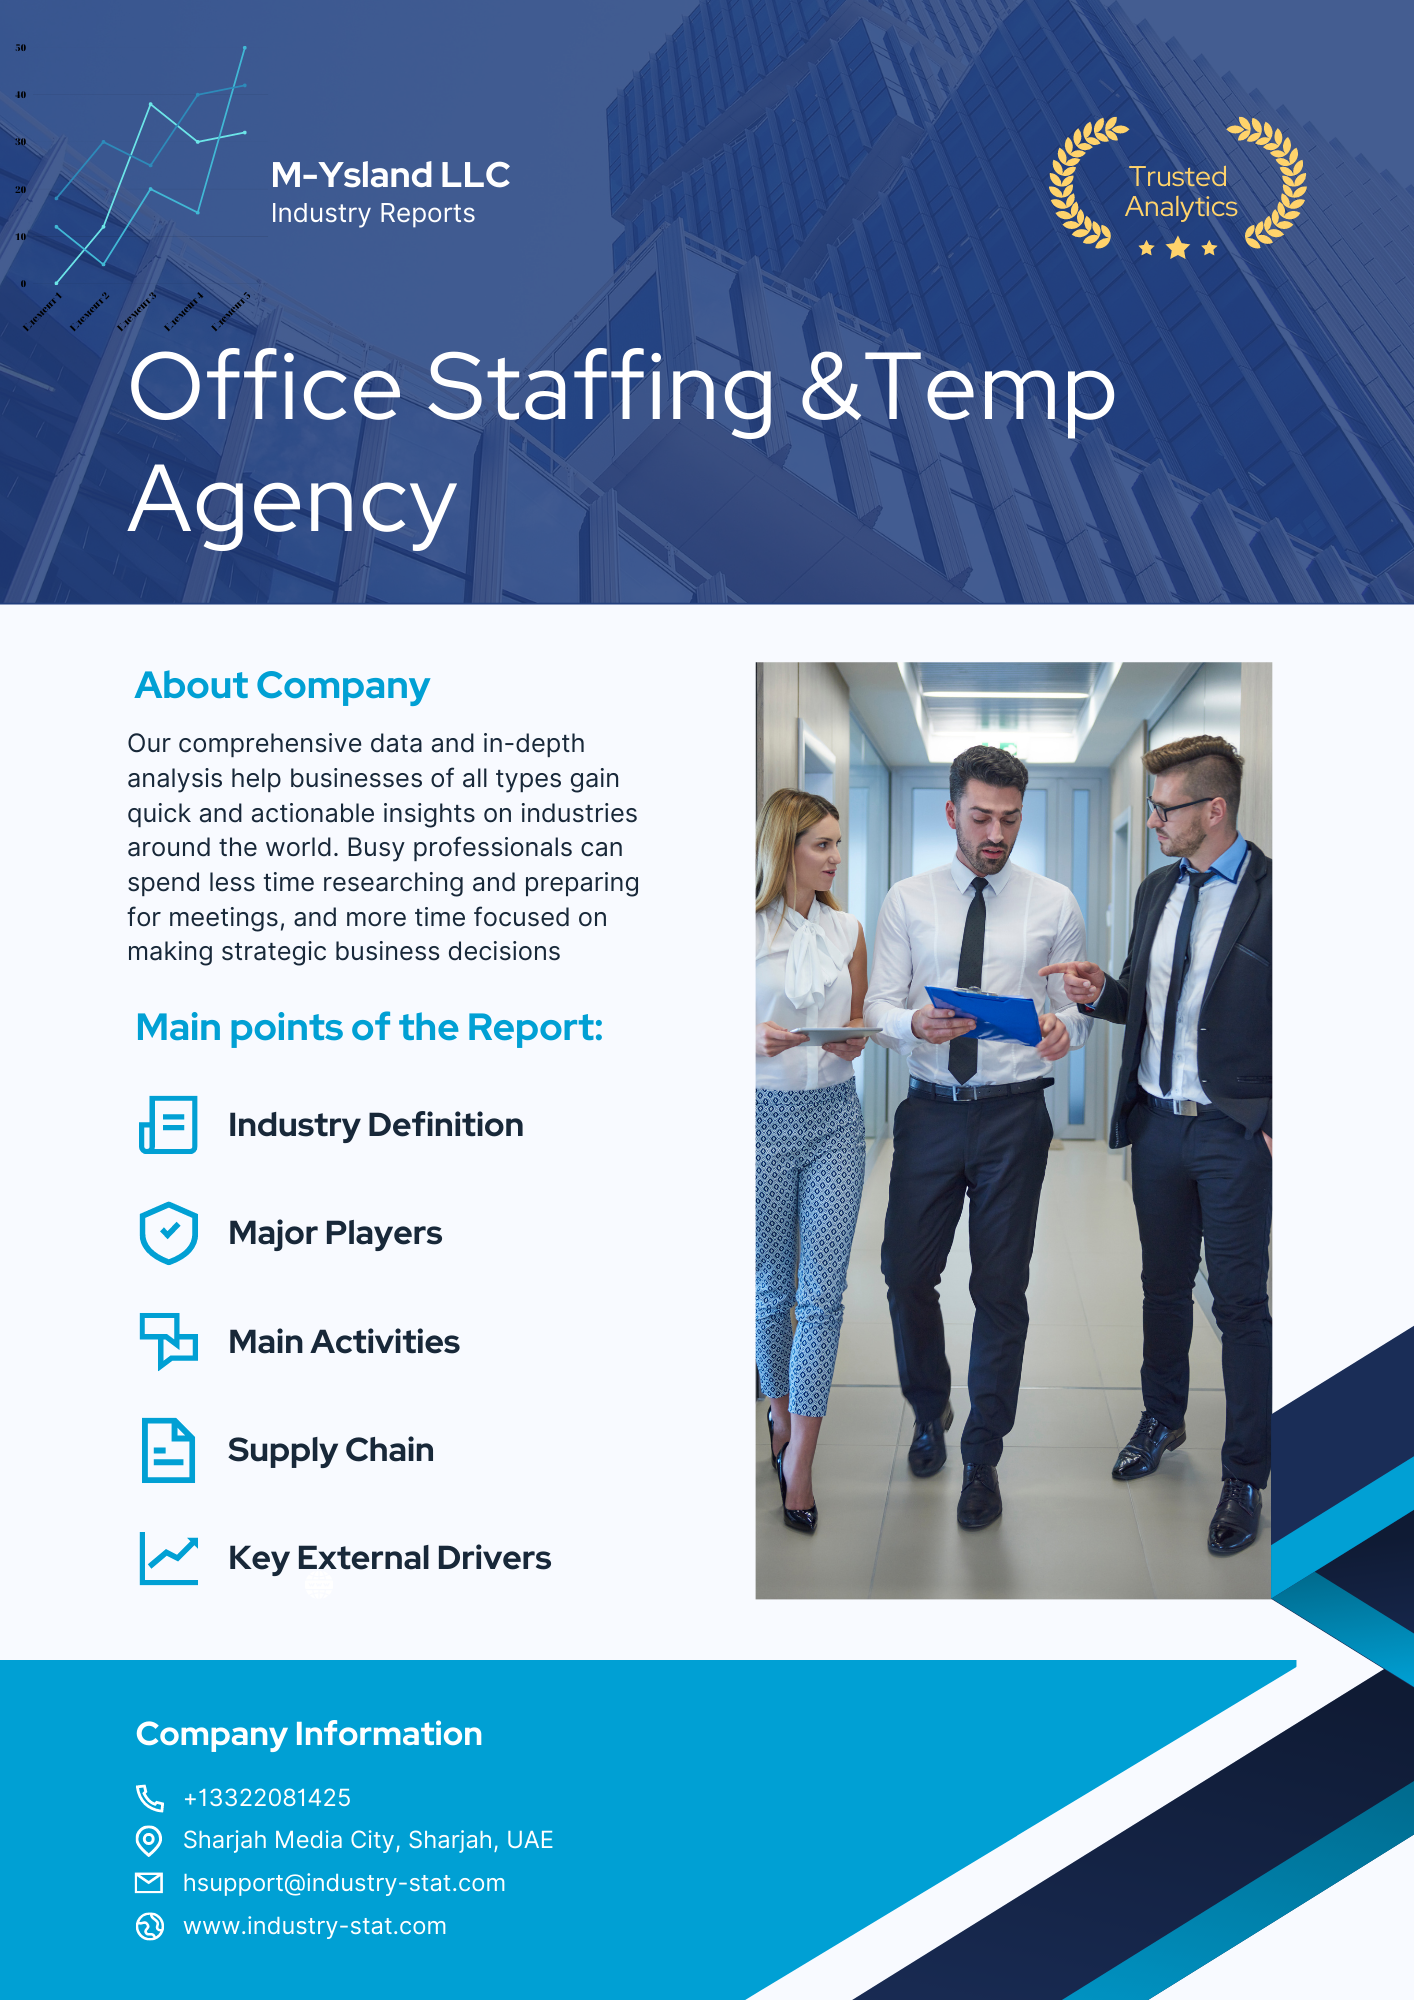 Office Staffing & Temp Agency